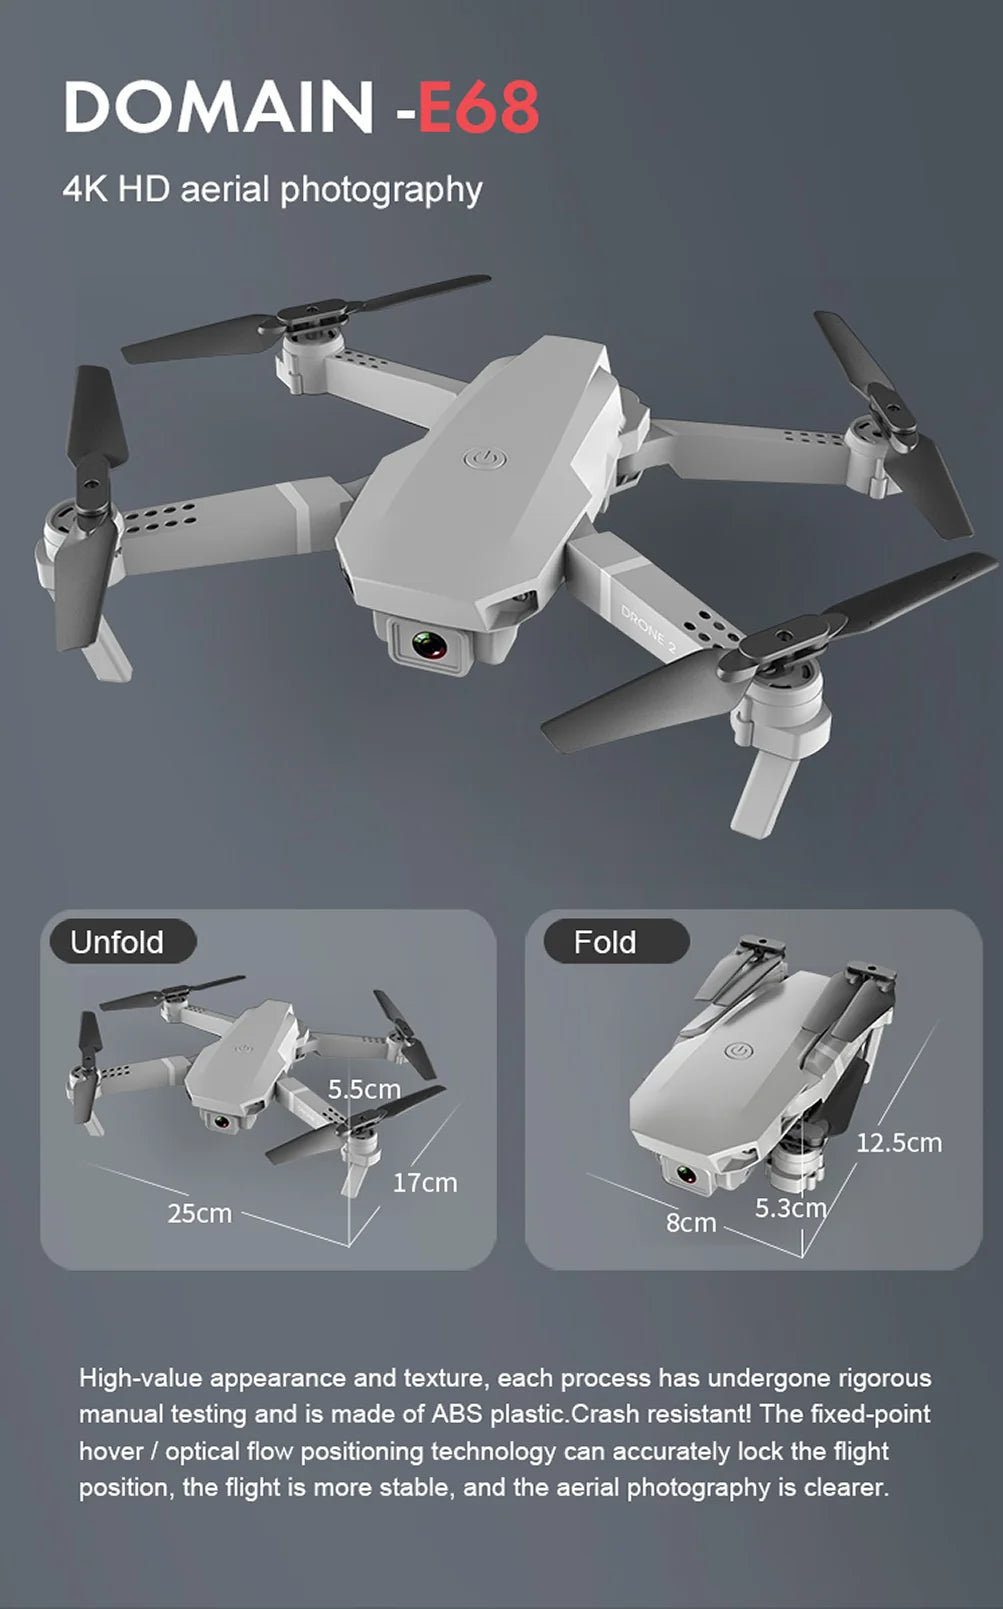 E59 Drone, each process undergone rigorous manual testing and is made of abs plastic